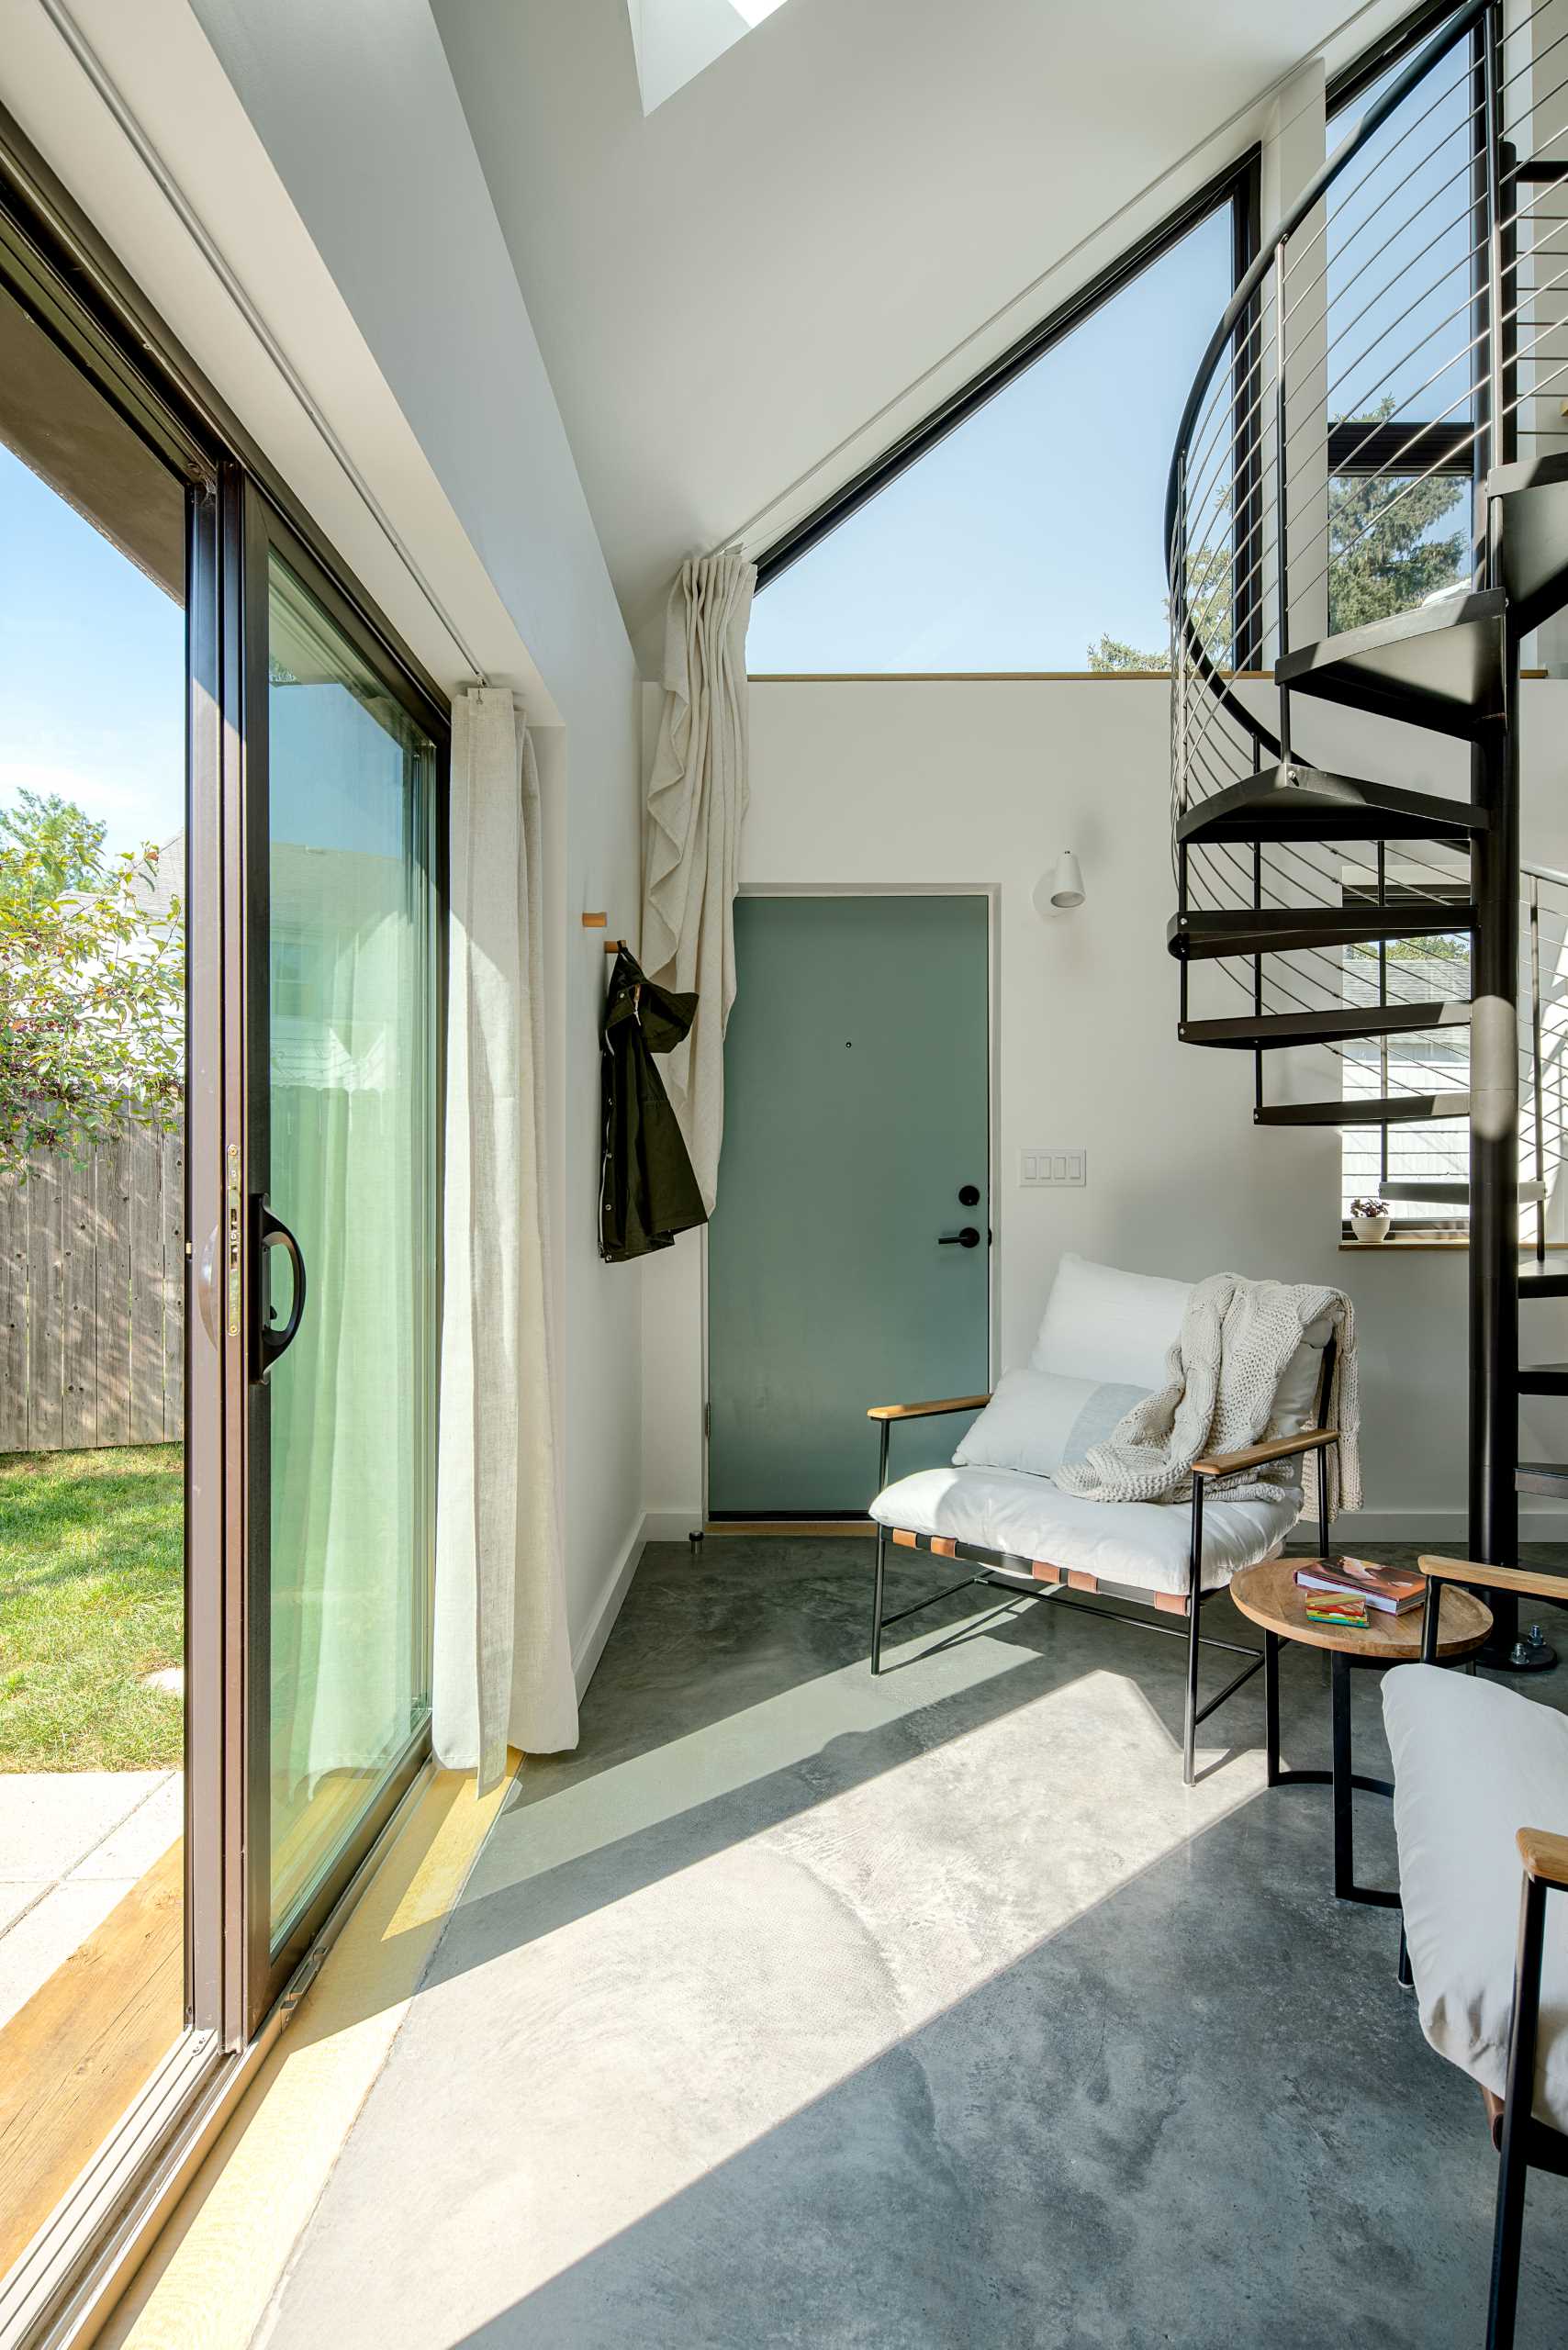 A small studio apartment with a sliding door that opens to a patio.